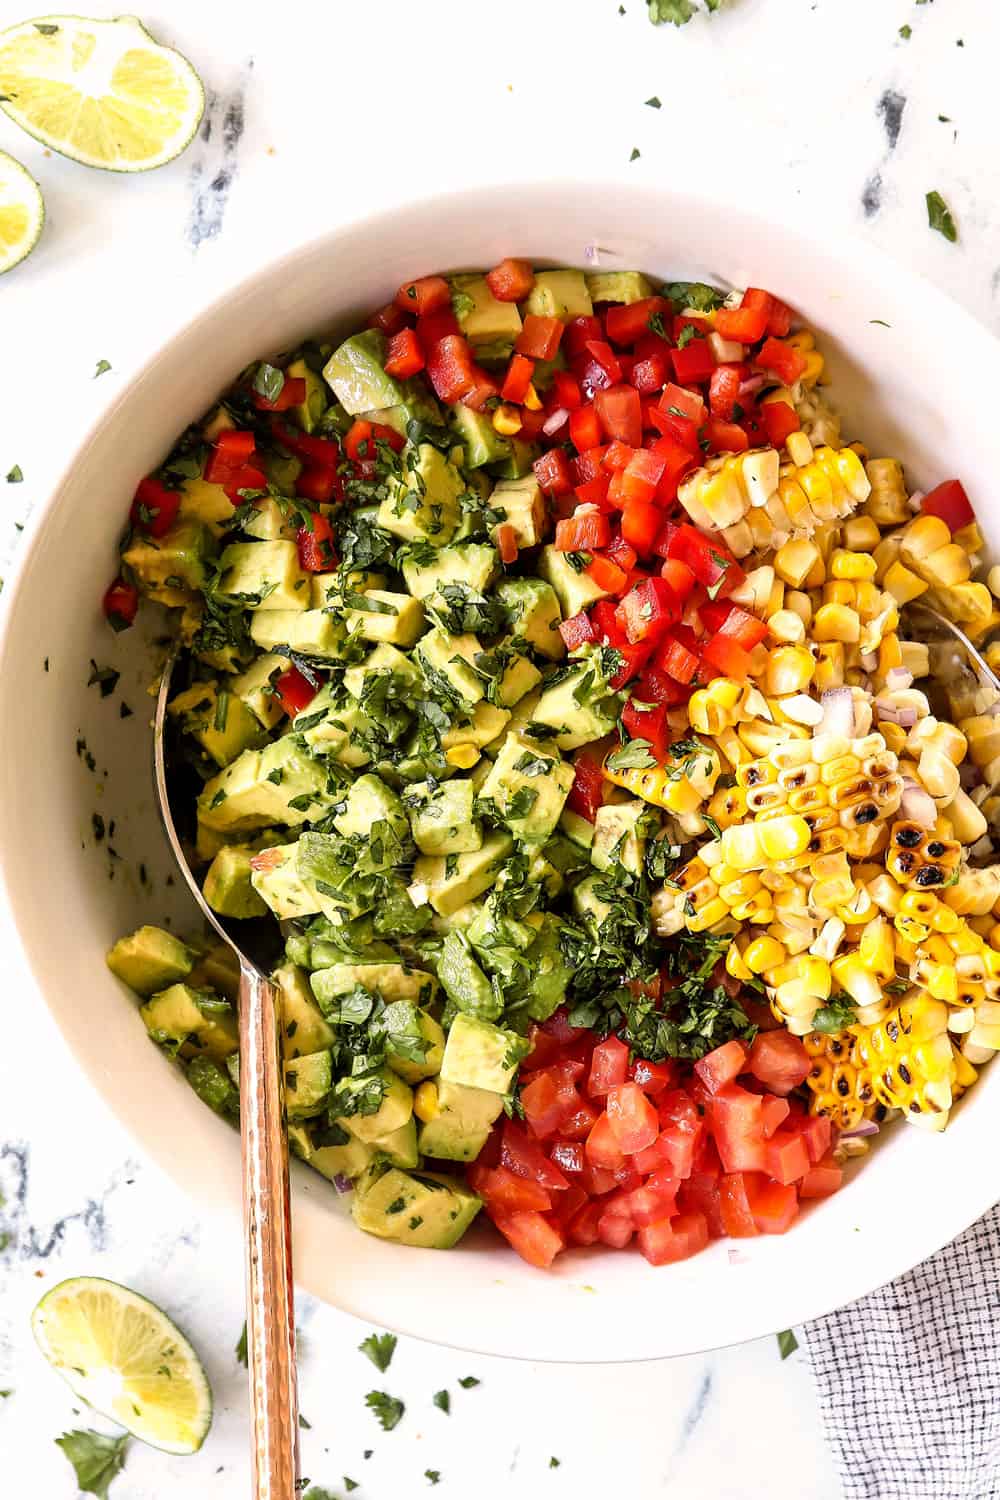 showing how to make avocado corn salsa by tossing avocados, corn, tomatoes, cilantro, red onions and cilantro together in a bowl with lime juice